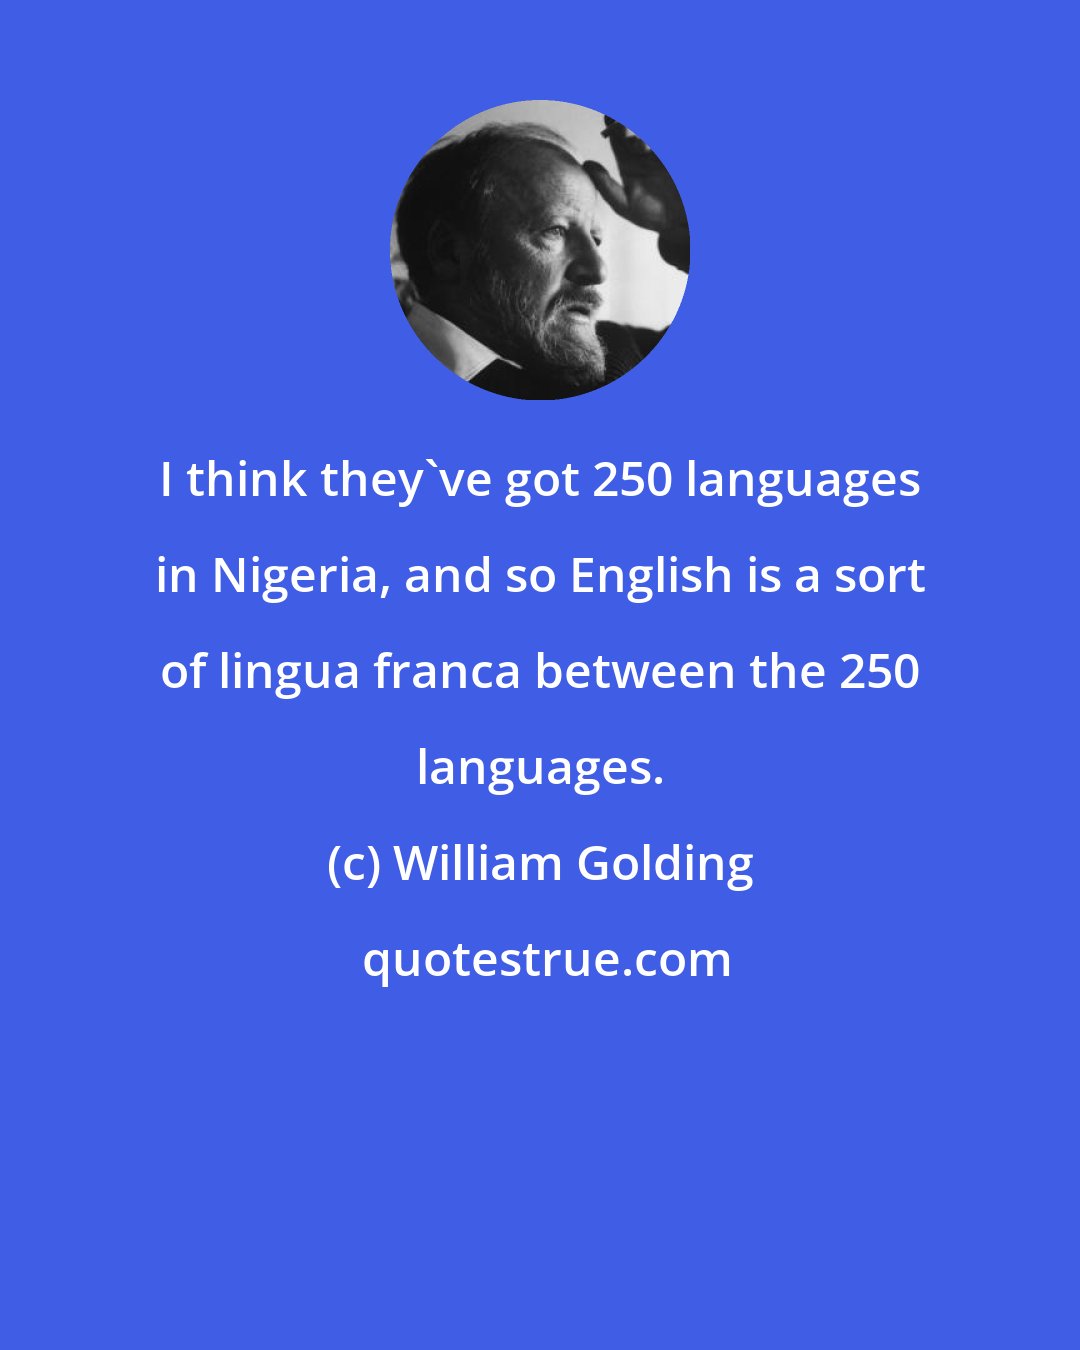 William Golding: I think they've got 250 languages in Nigeria, and so English is a sort of lingua franca between the 250 languages.